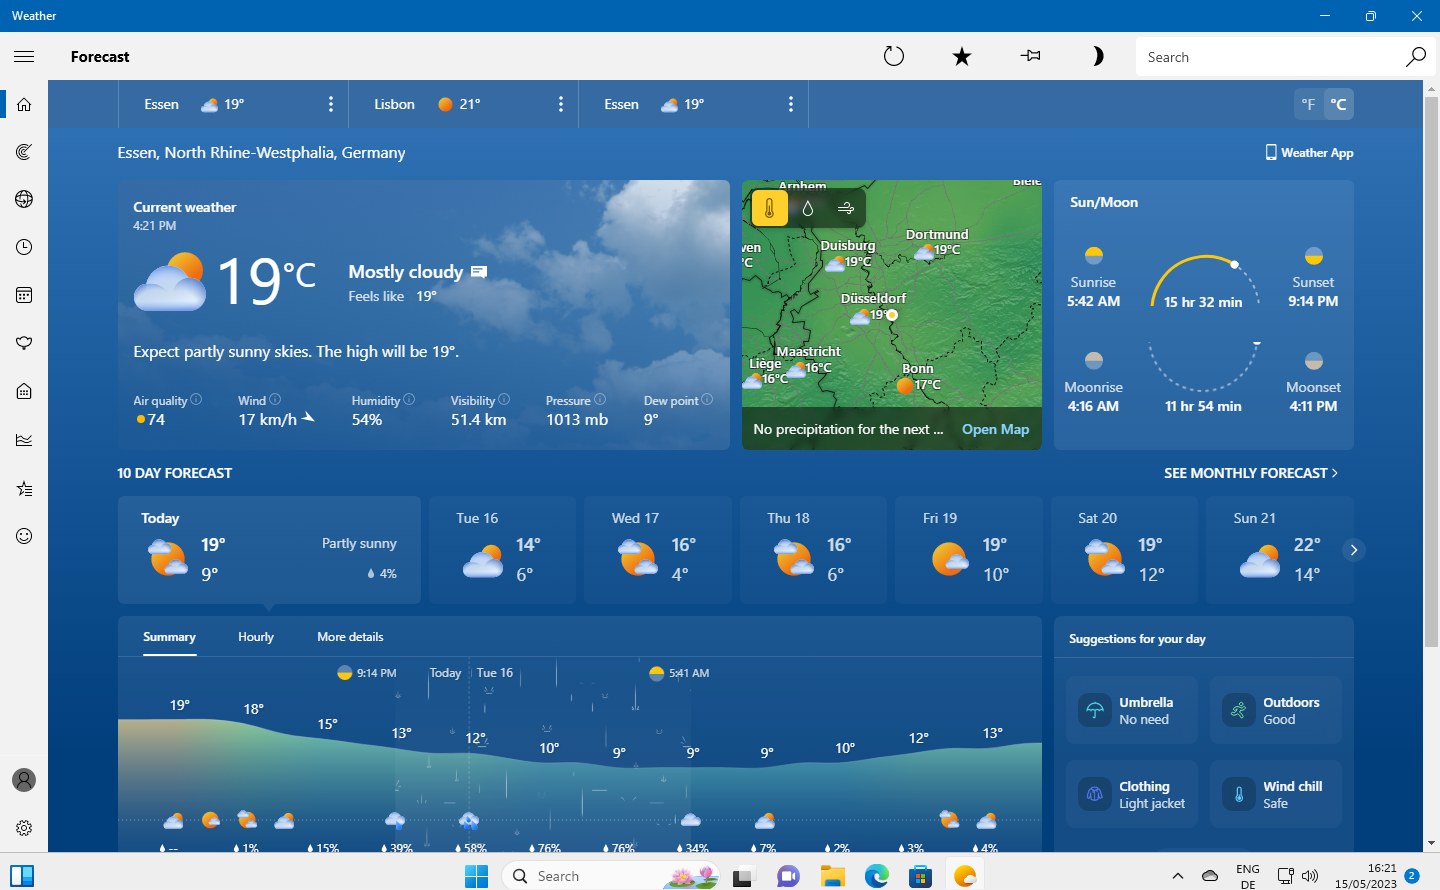 Microsoft removes MSN and most ads from Windows 11's Weather App windows-11-weather-app-update.png